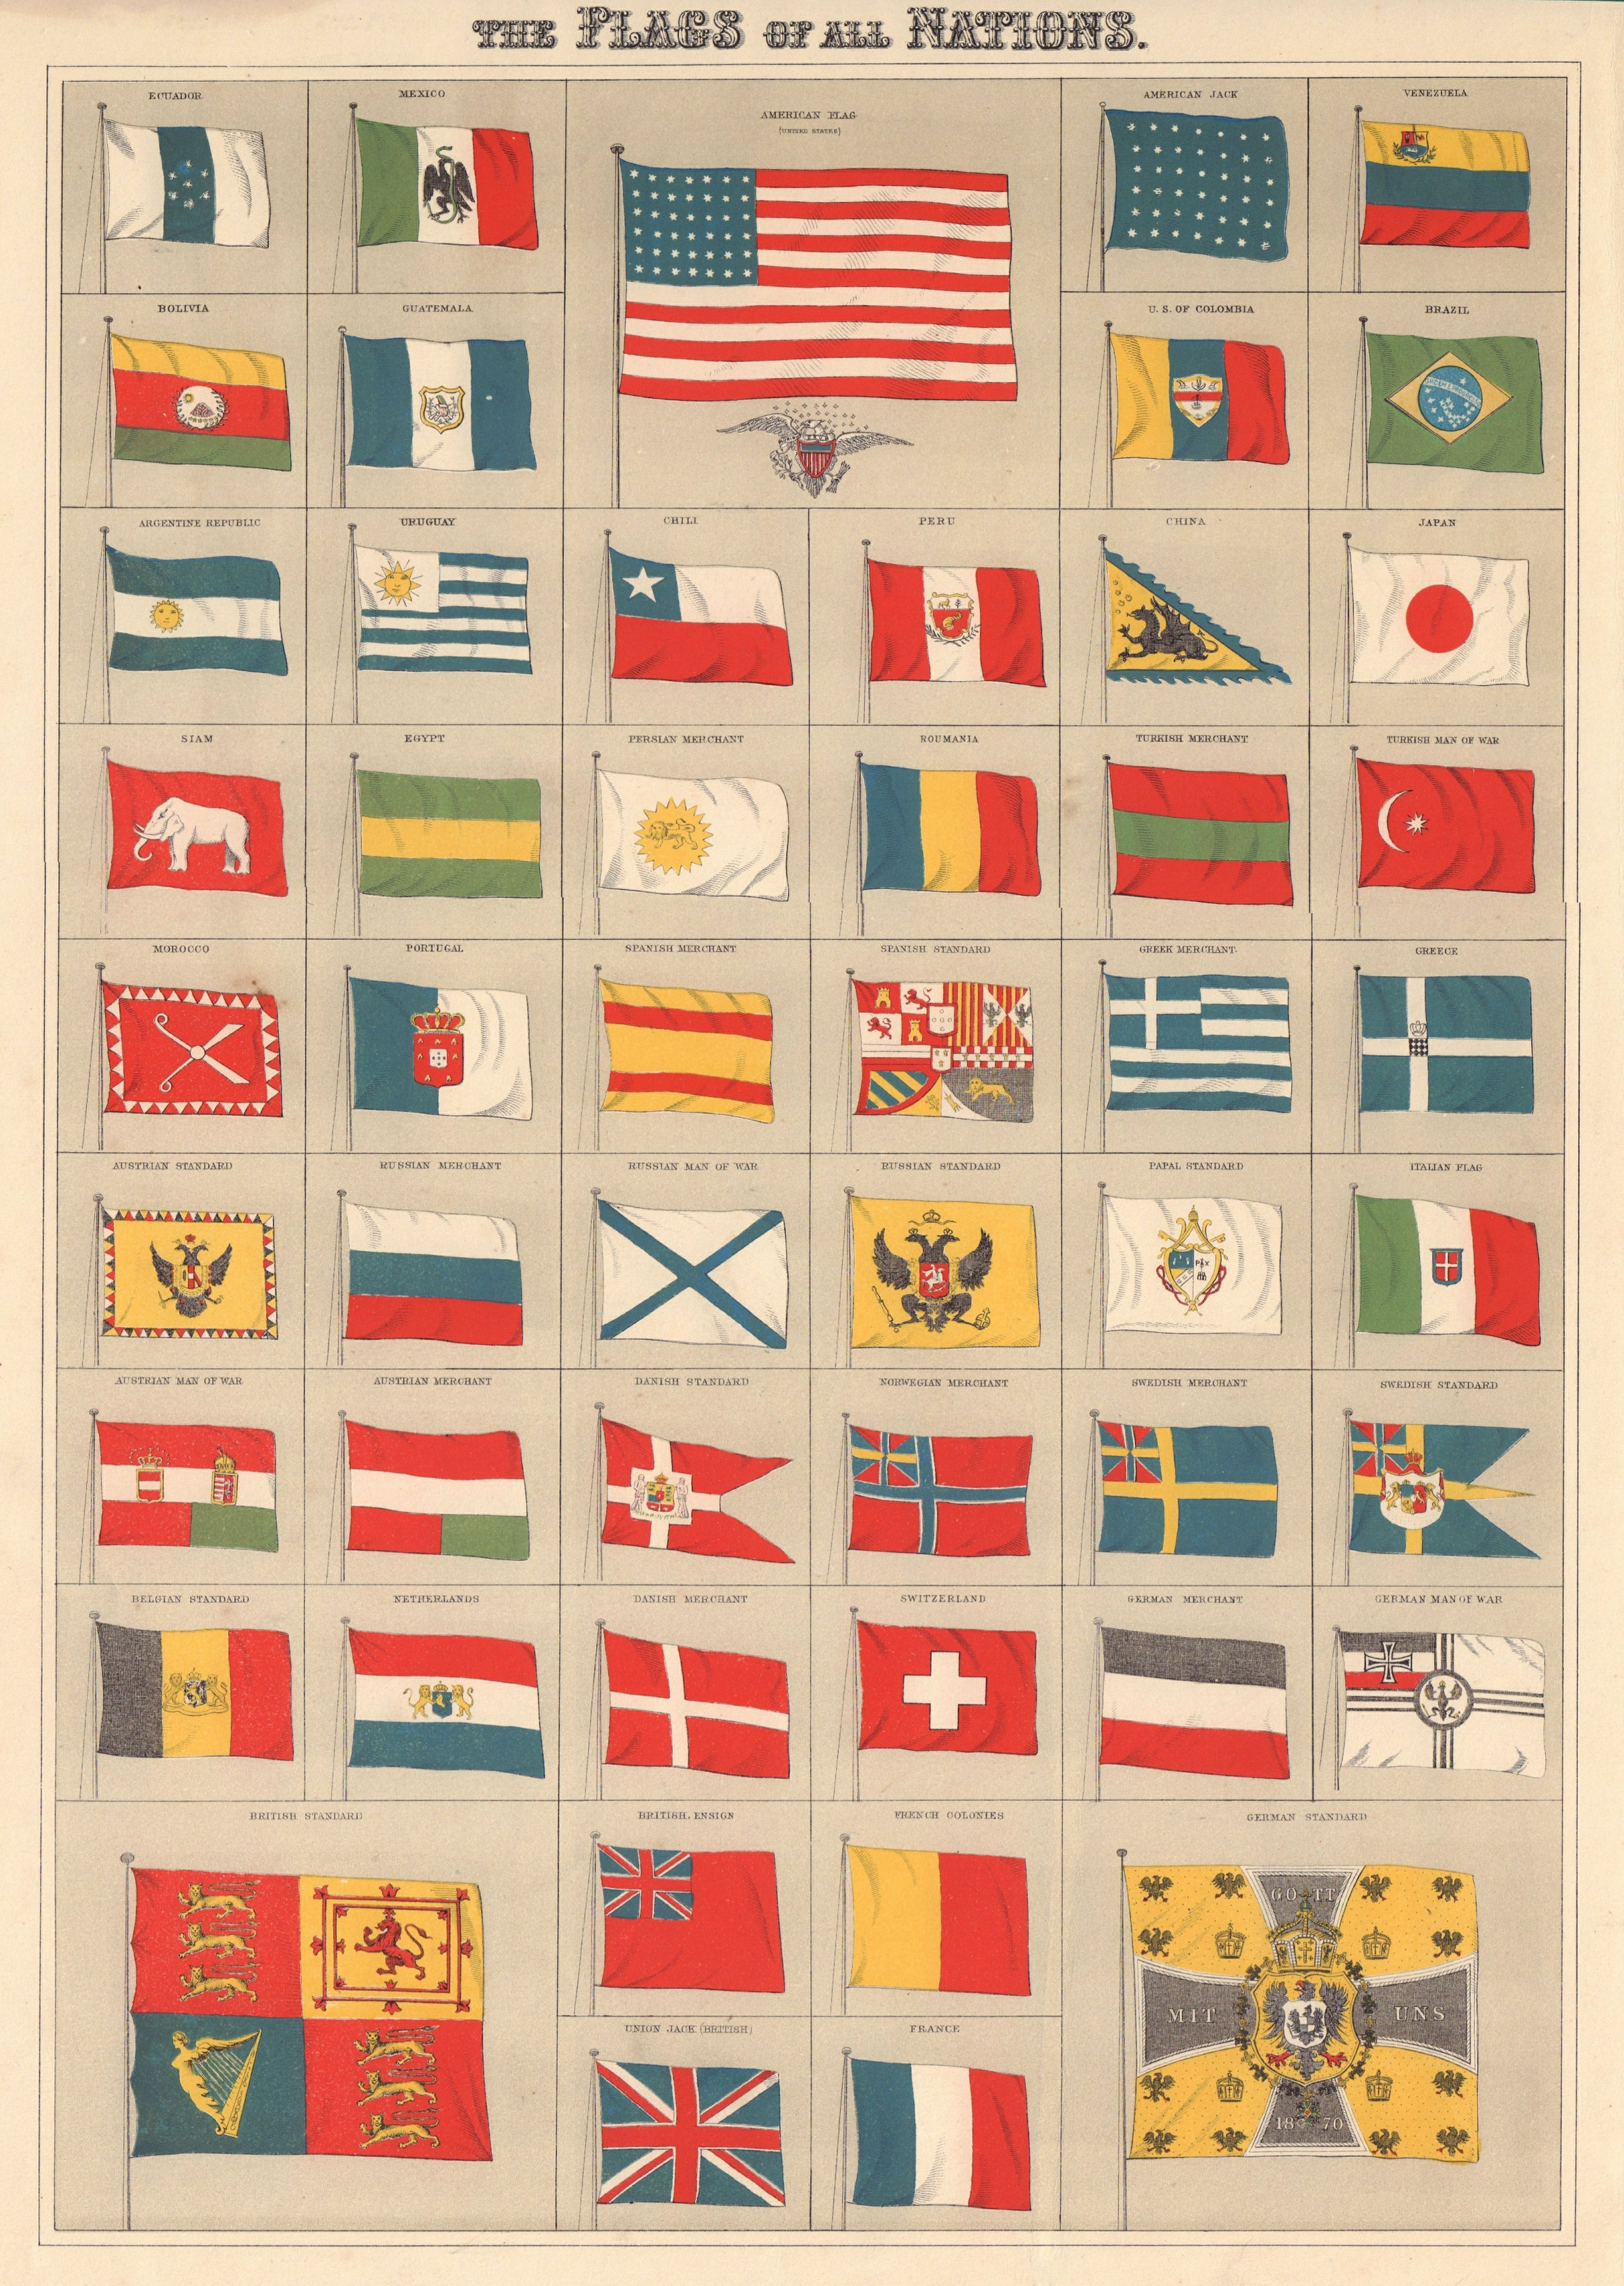 Flags of all Nations. Imperial standards merchants cities. BARTHOLOMEW 1898